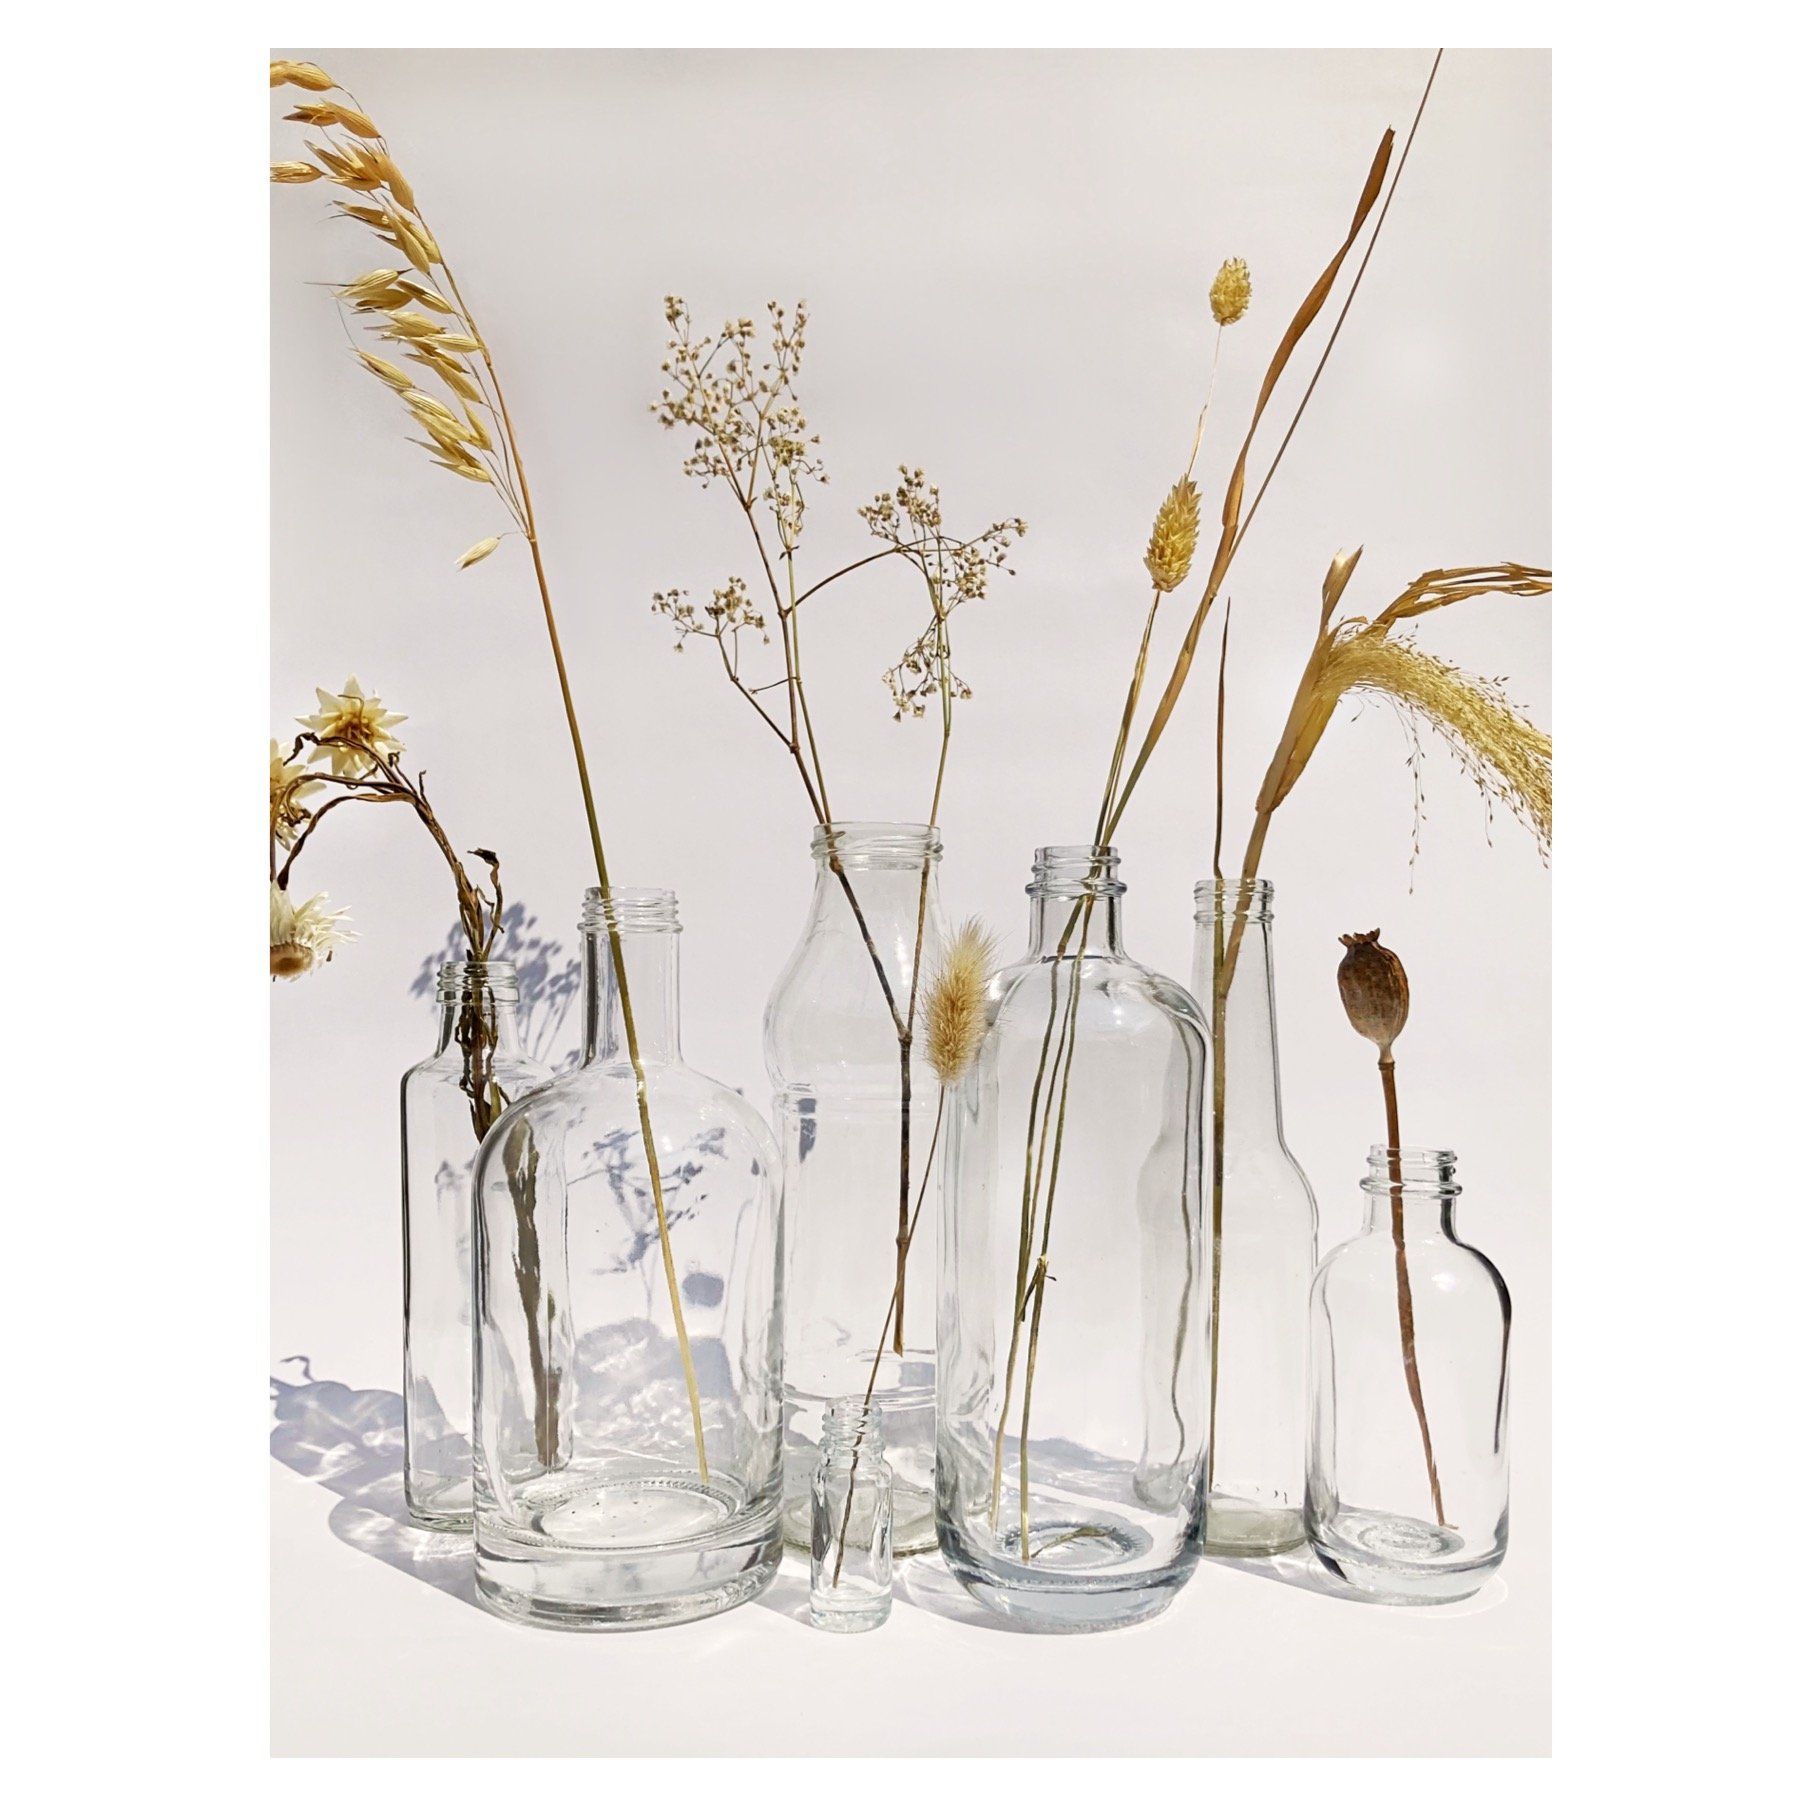 N E W : B O T T L E S H O P .

I&rsquo;ve been collecting glassware for years: from vintage decorative glass to quirky soda bottles and everything that has struck my fancy in between. Always moving them in and out of ever-changing windowsill landscap